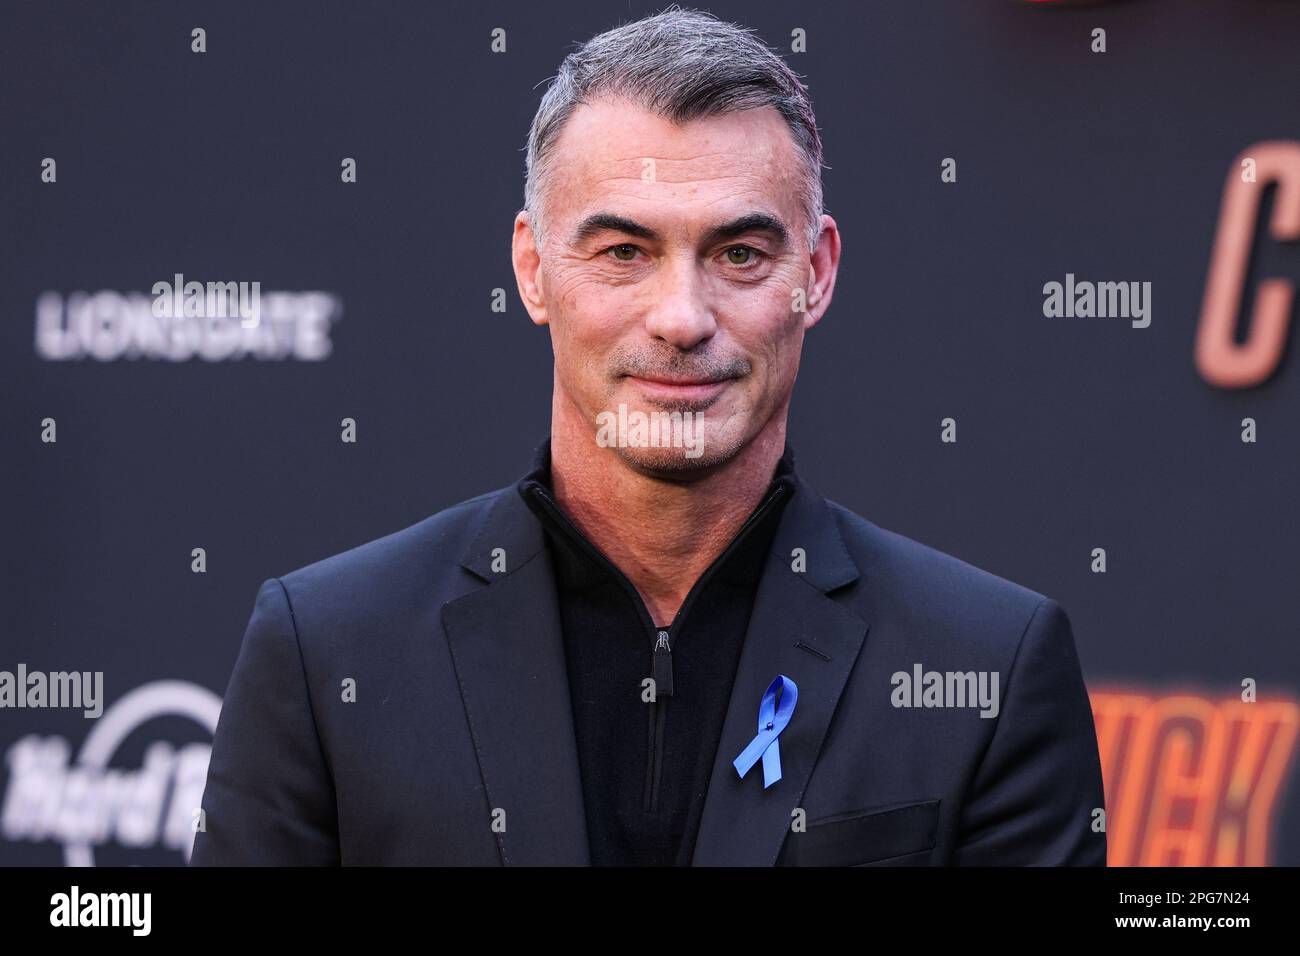 HOLLYWOOD, LOS ANGELES, CALIFORNIA, USA - MARCH 20: American stuntman and film director Chad Stahelski arrives at the Los Angeles Premiere Of Lionsgate's 'John Wick: Chapter 4' held at the TCL Chinese Theatre IMAX on March 20, 2023 in Hollywood, Los Angeles, California, United States. (Photo by Xavier Collin/Image Press Agency) Stock Photo